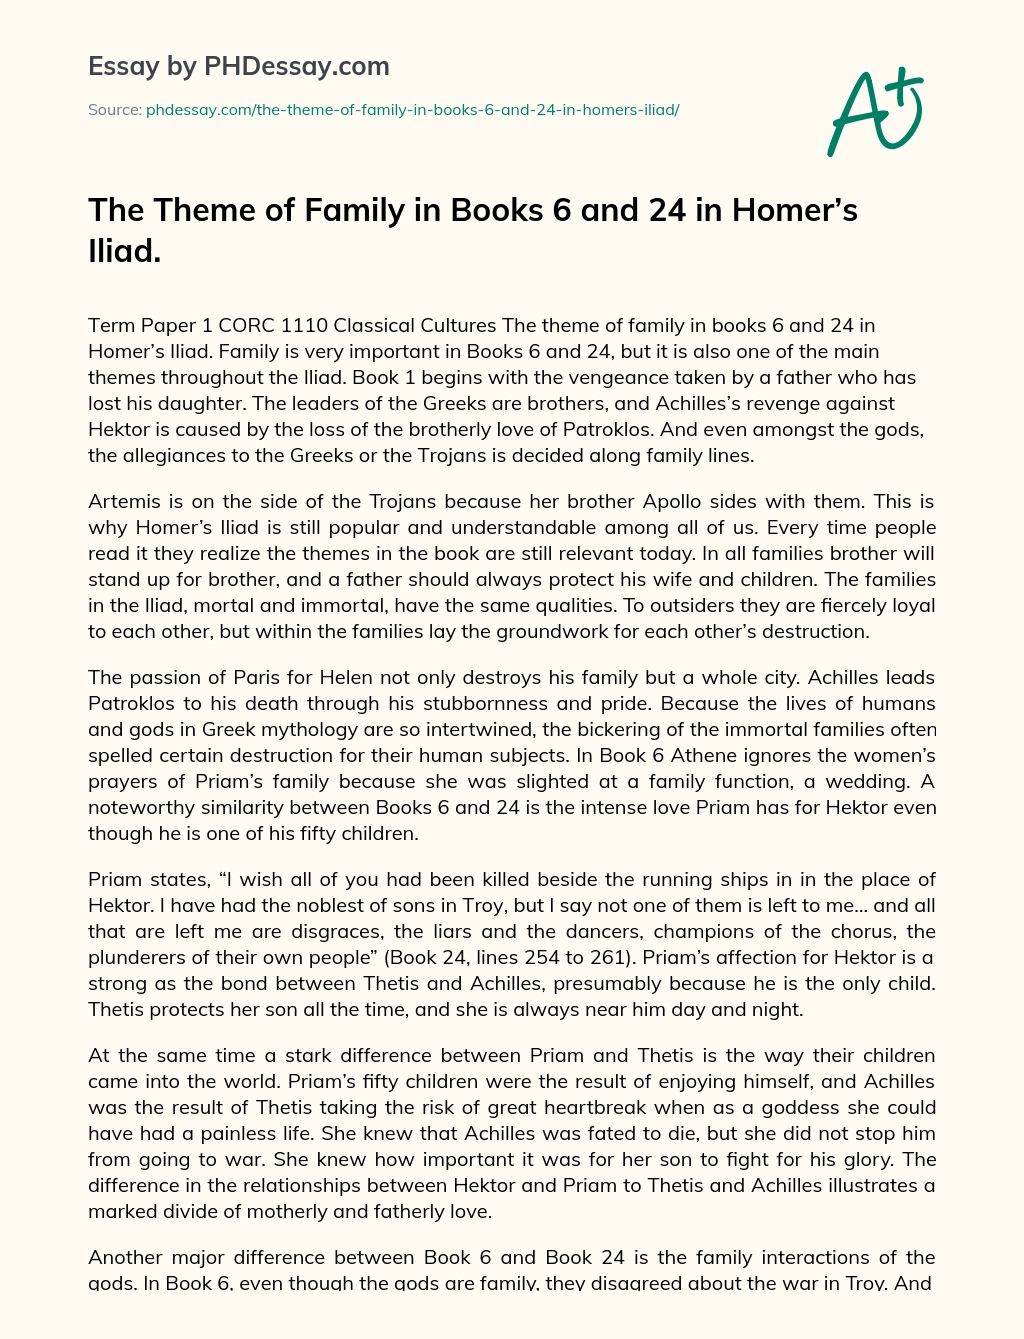 The Theme of Family in Books 6 and 24 in Homer’s Iliad. essay